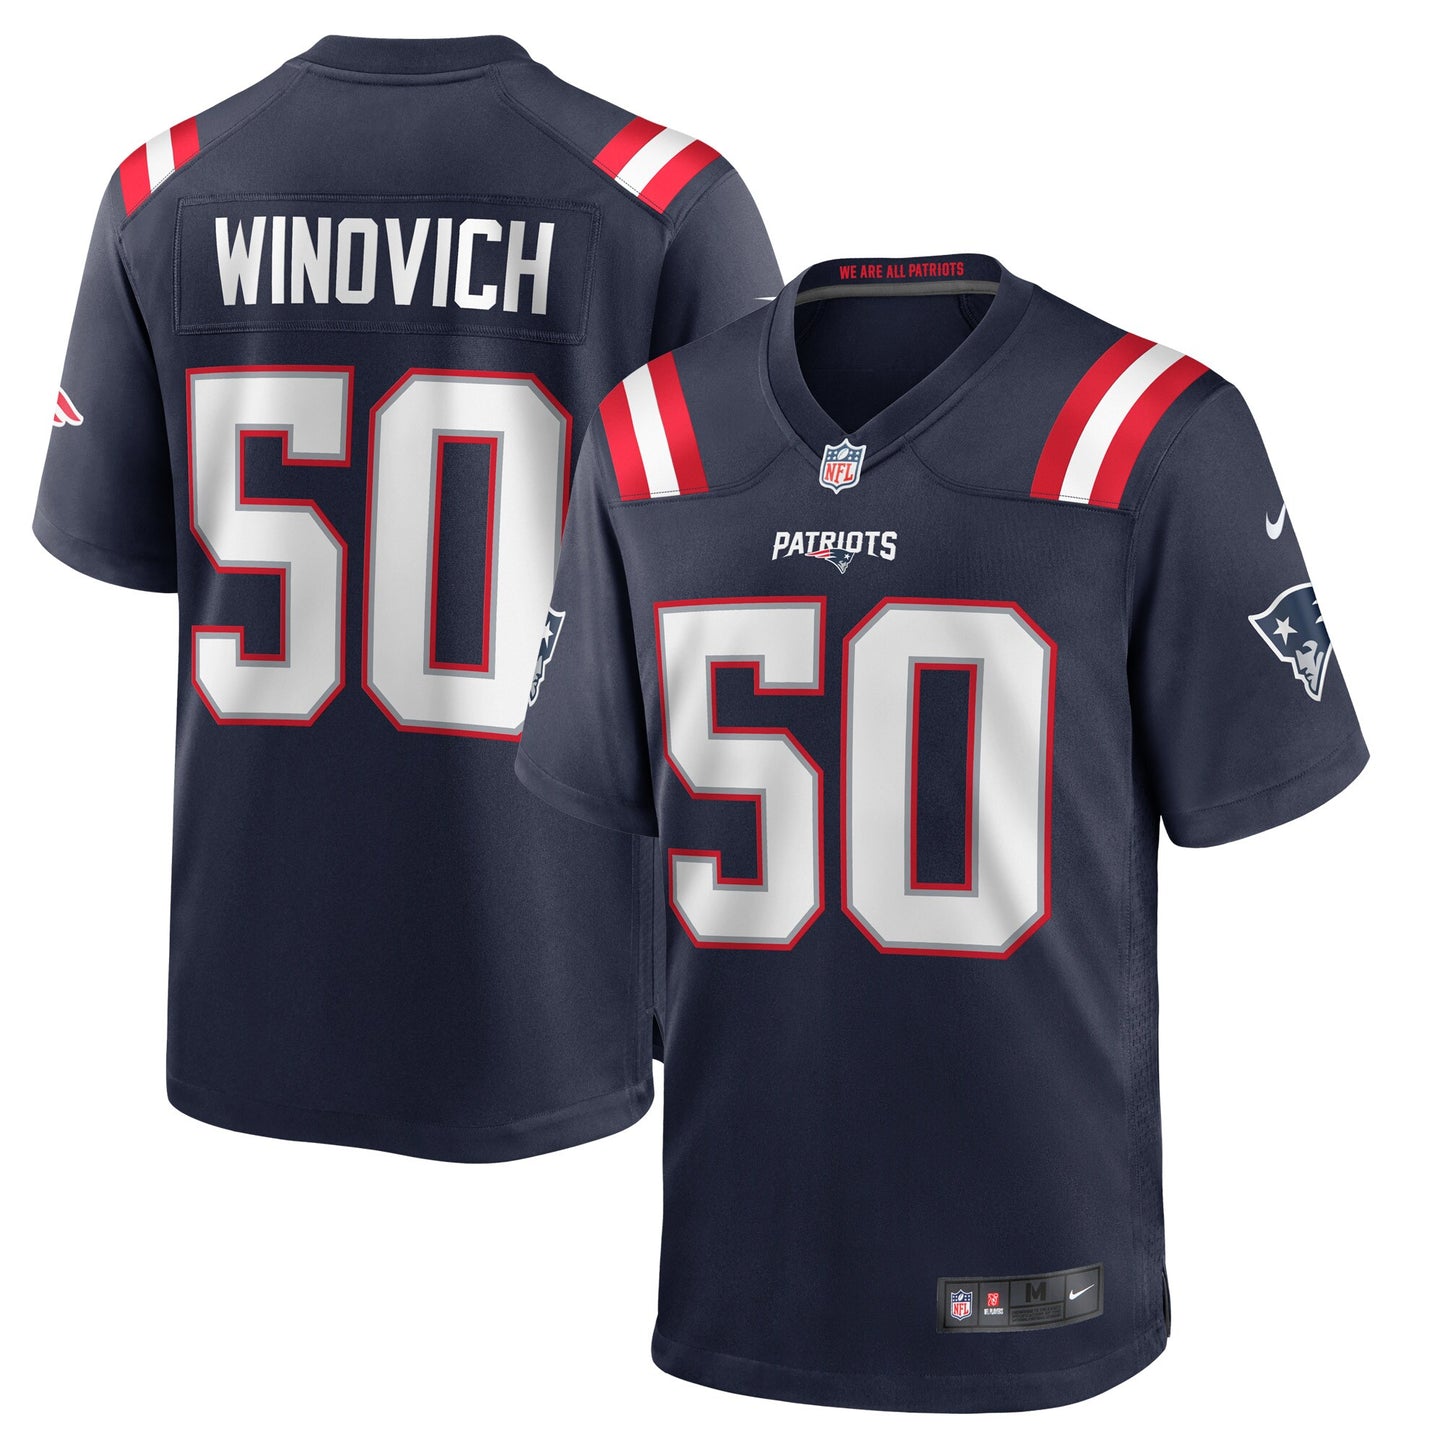 Chase Winovich New England Patriots Nike Game Jersey - Navy